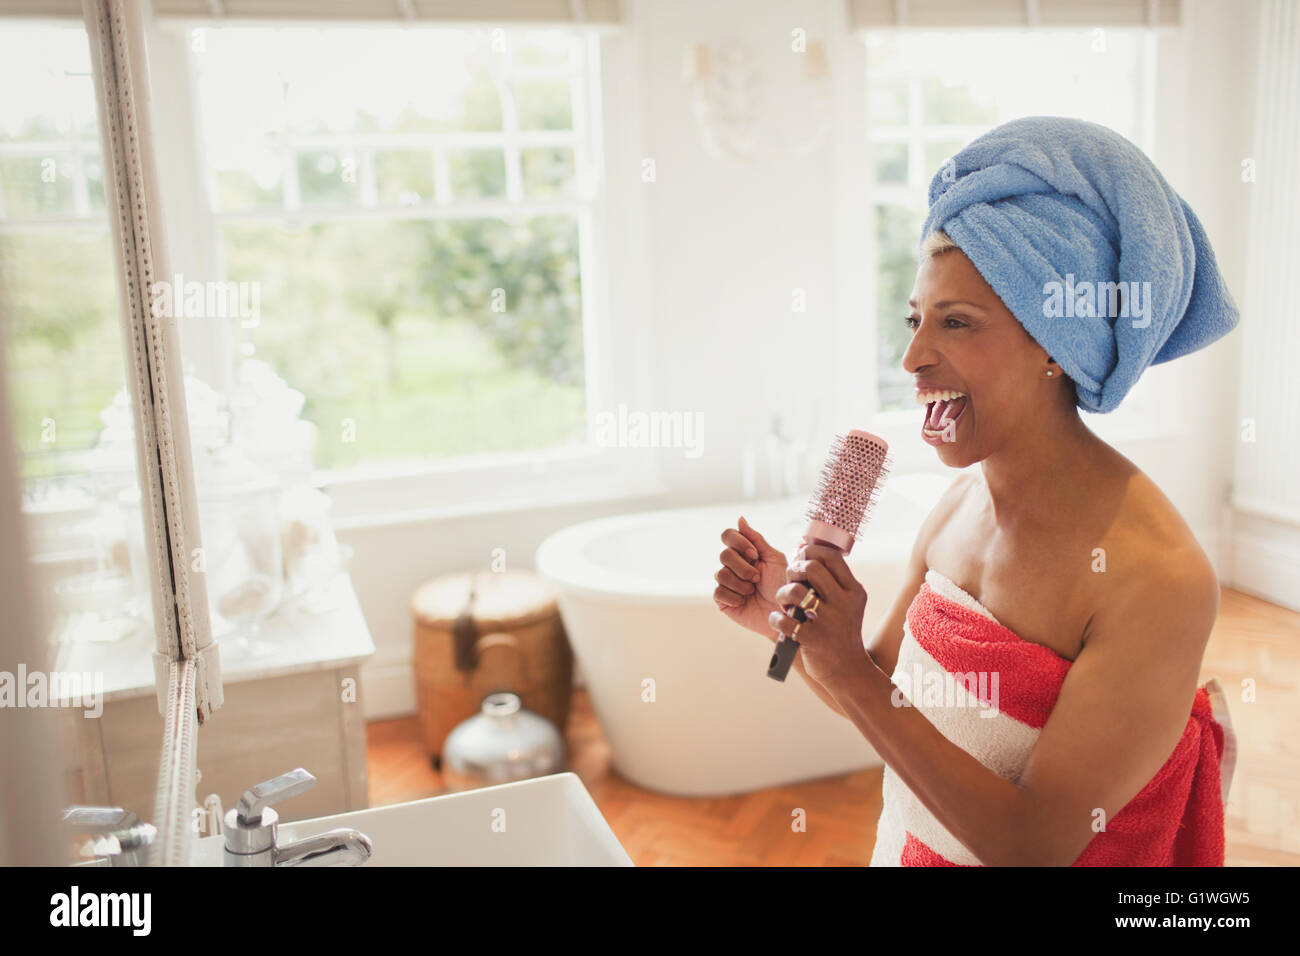 Playful mature woman singing into hairbrush in bathroom Stock Photo